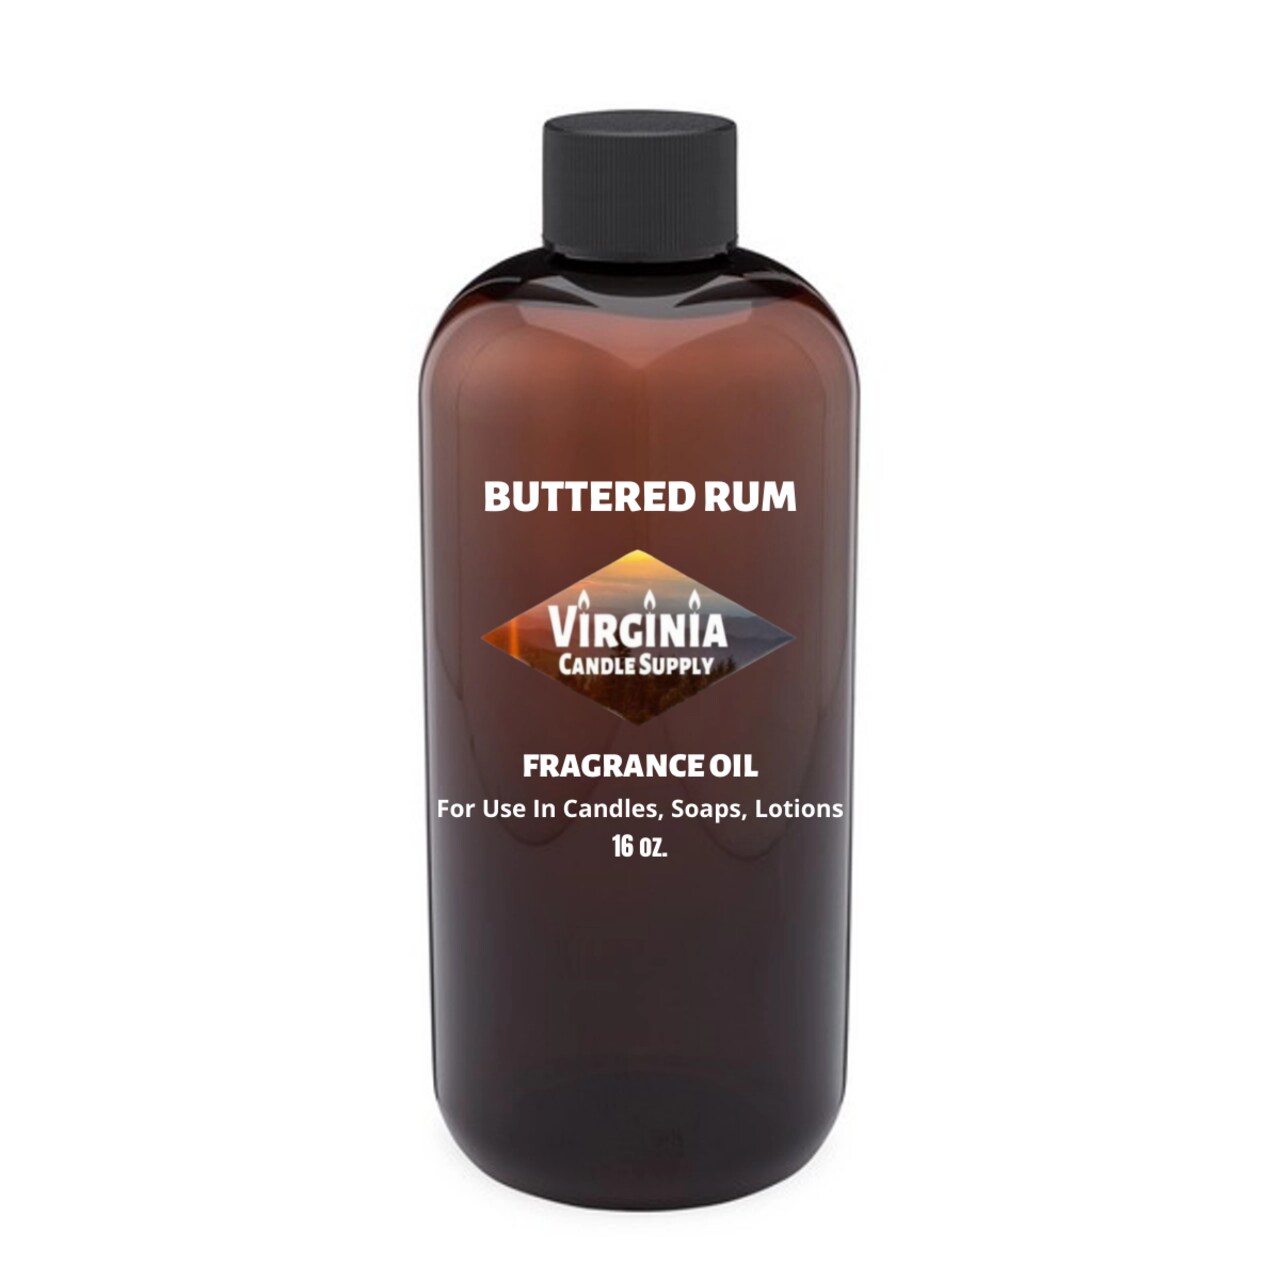 Buttered Rum Fragrance Oil (Our Version of the Brand Name) (16 oz Bottle) for Candle Making, Soap Making, Tart Making, Room Sprays, Lotions, Car Fresheners, Slime, Bath Bombs, Warmers&#x2026;